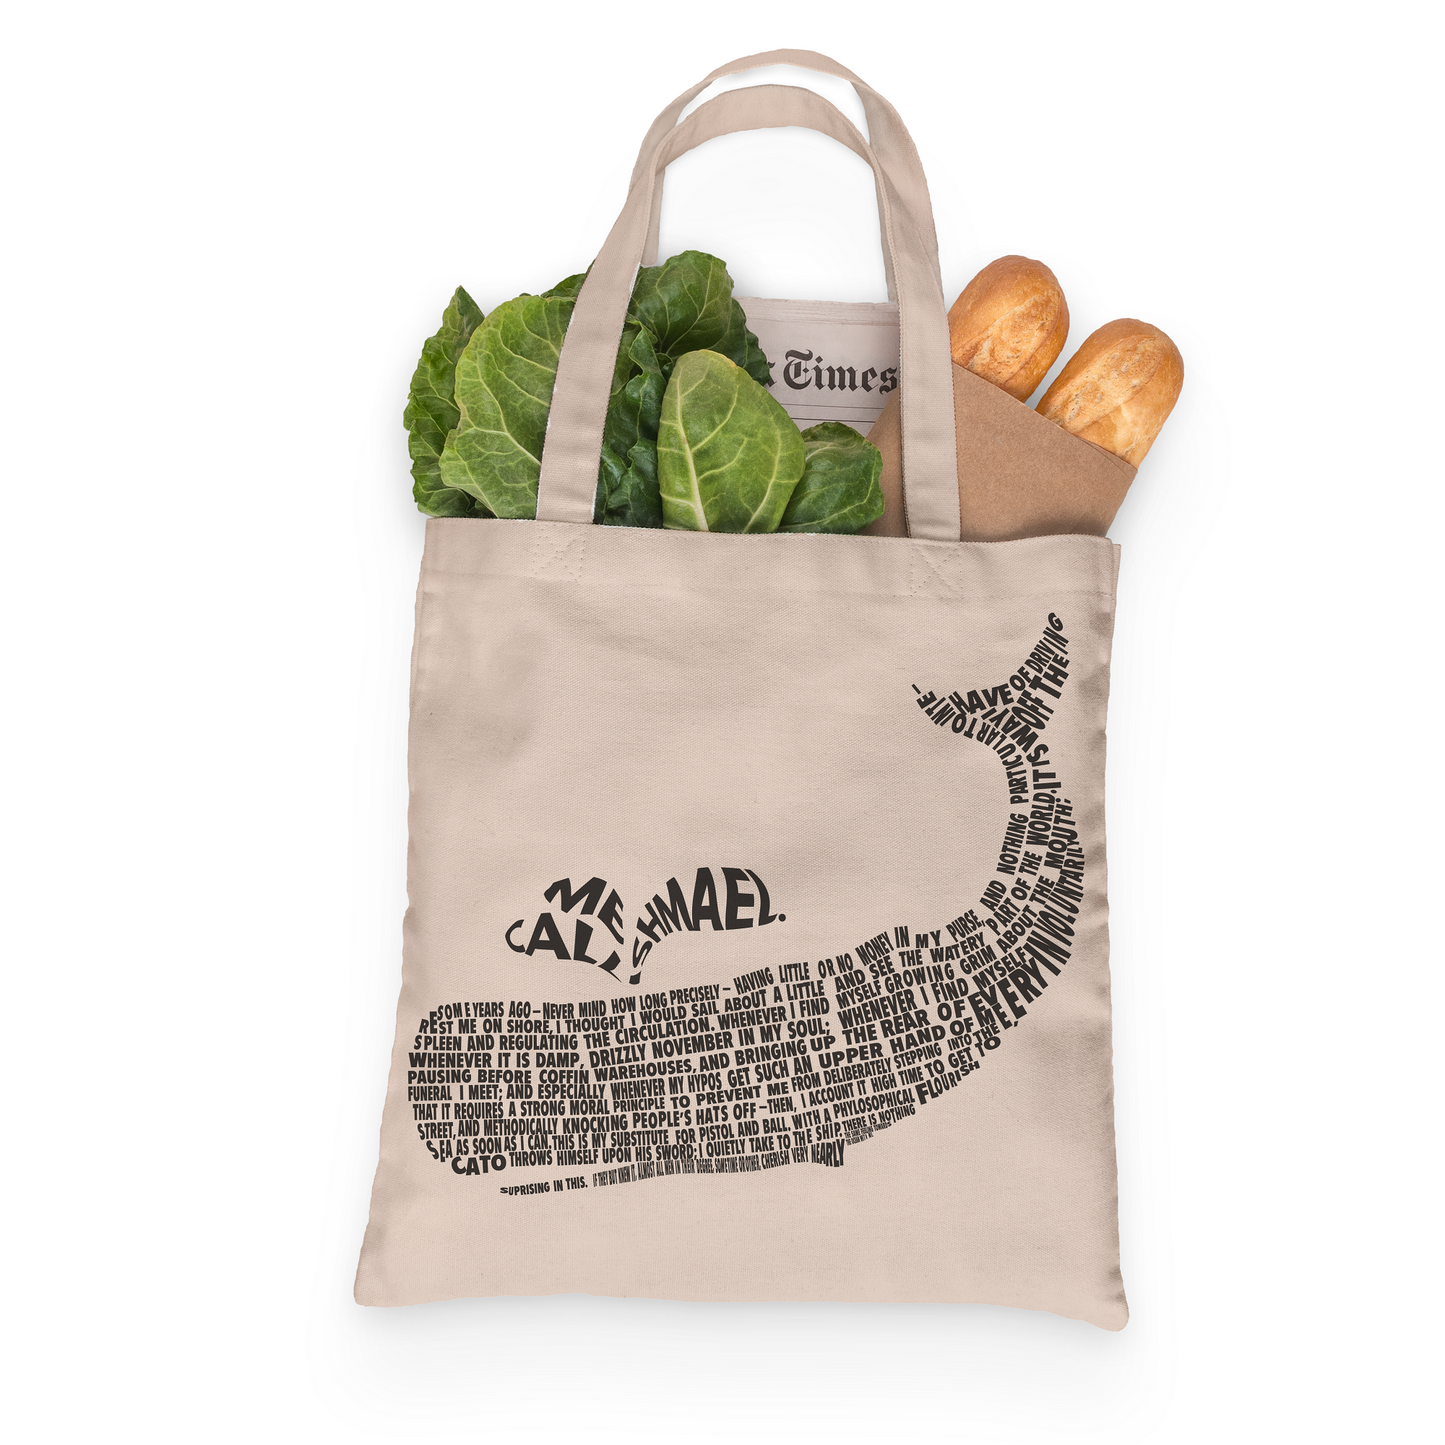 Moby Dick Tote, Grocery Tote, Book Tote, Office Tote, 100% Cotton Fun Tote